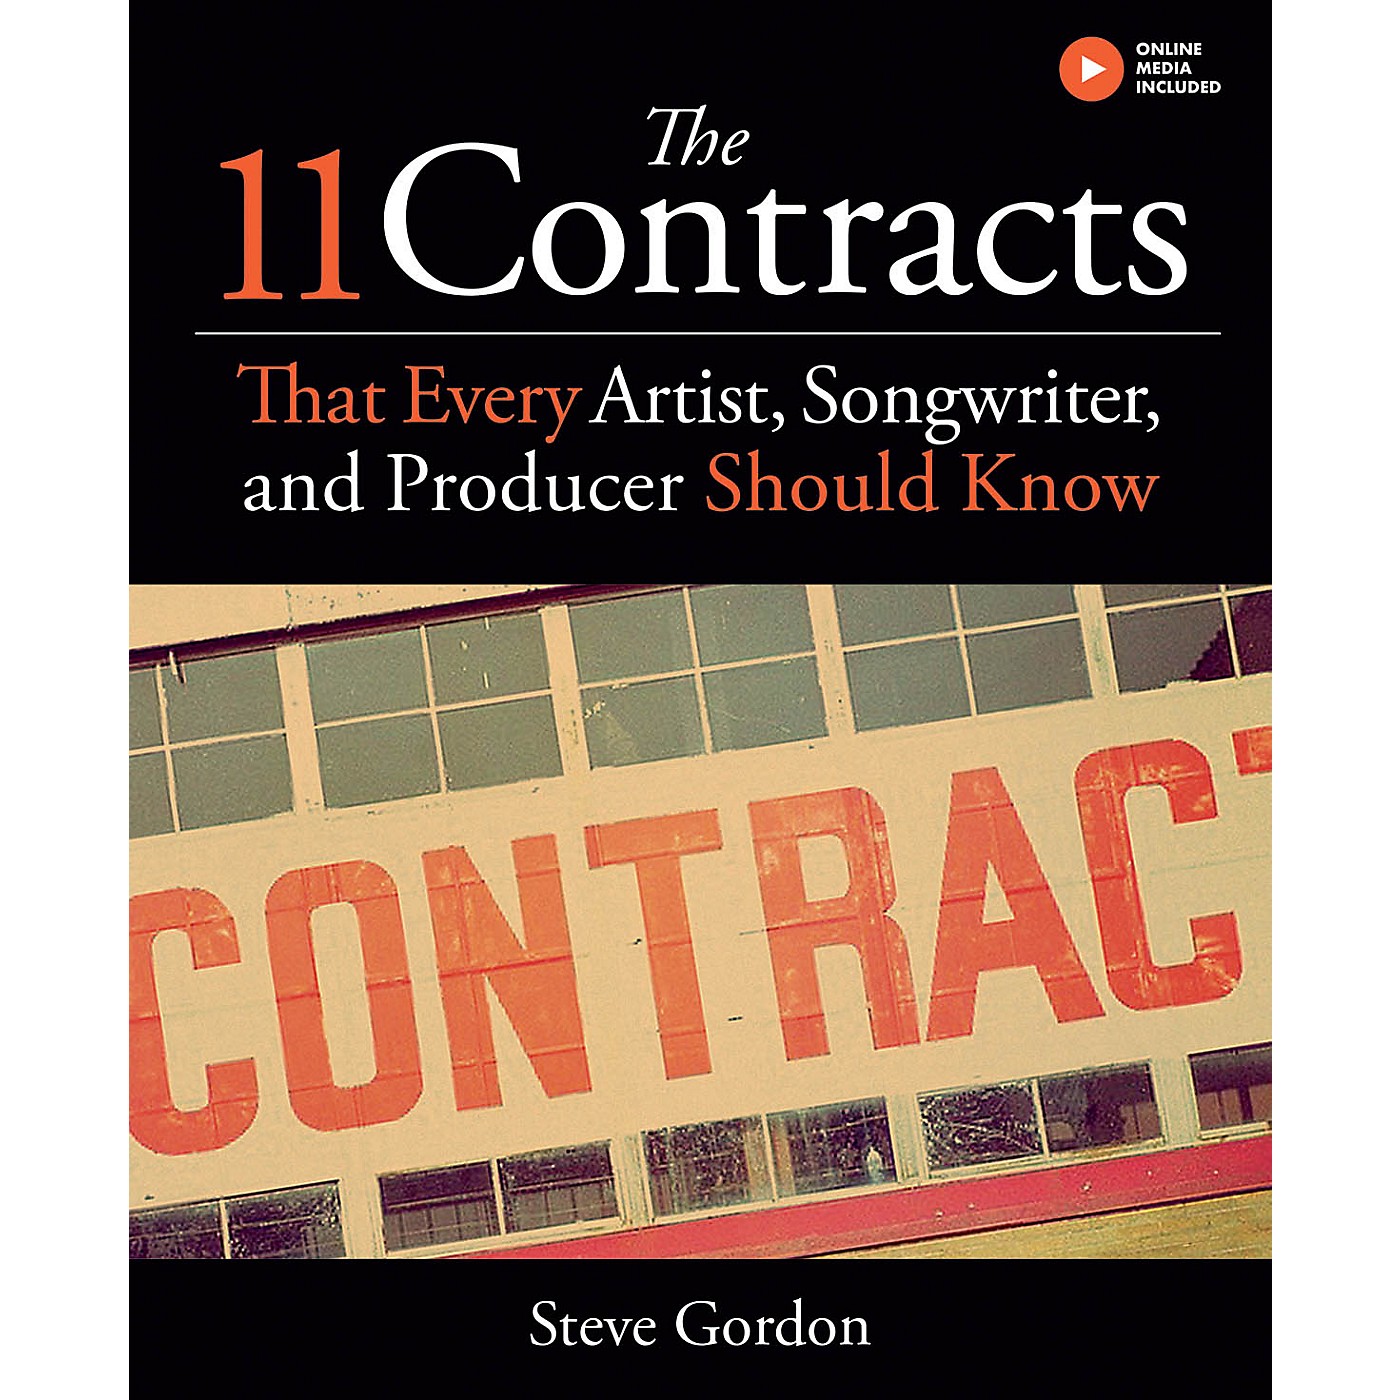 Hal Leonard The 11 Contracts That Every Artist, Songwriter, and Producer Should Know Book Hardcover by Steve Gordon thumbnail